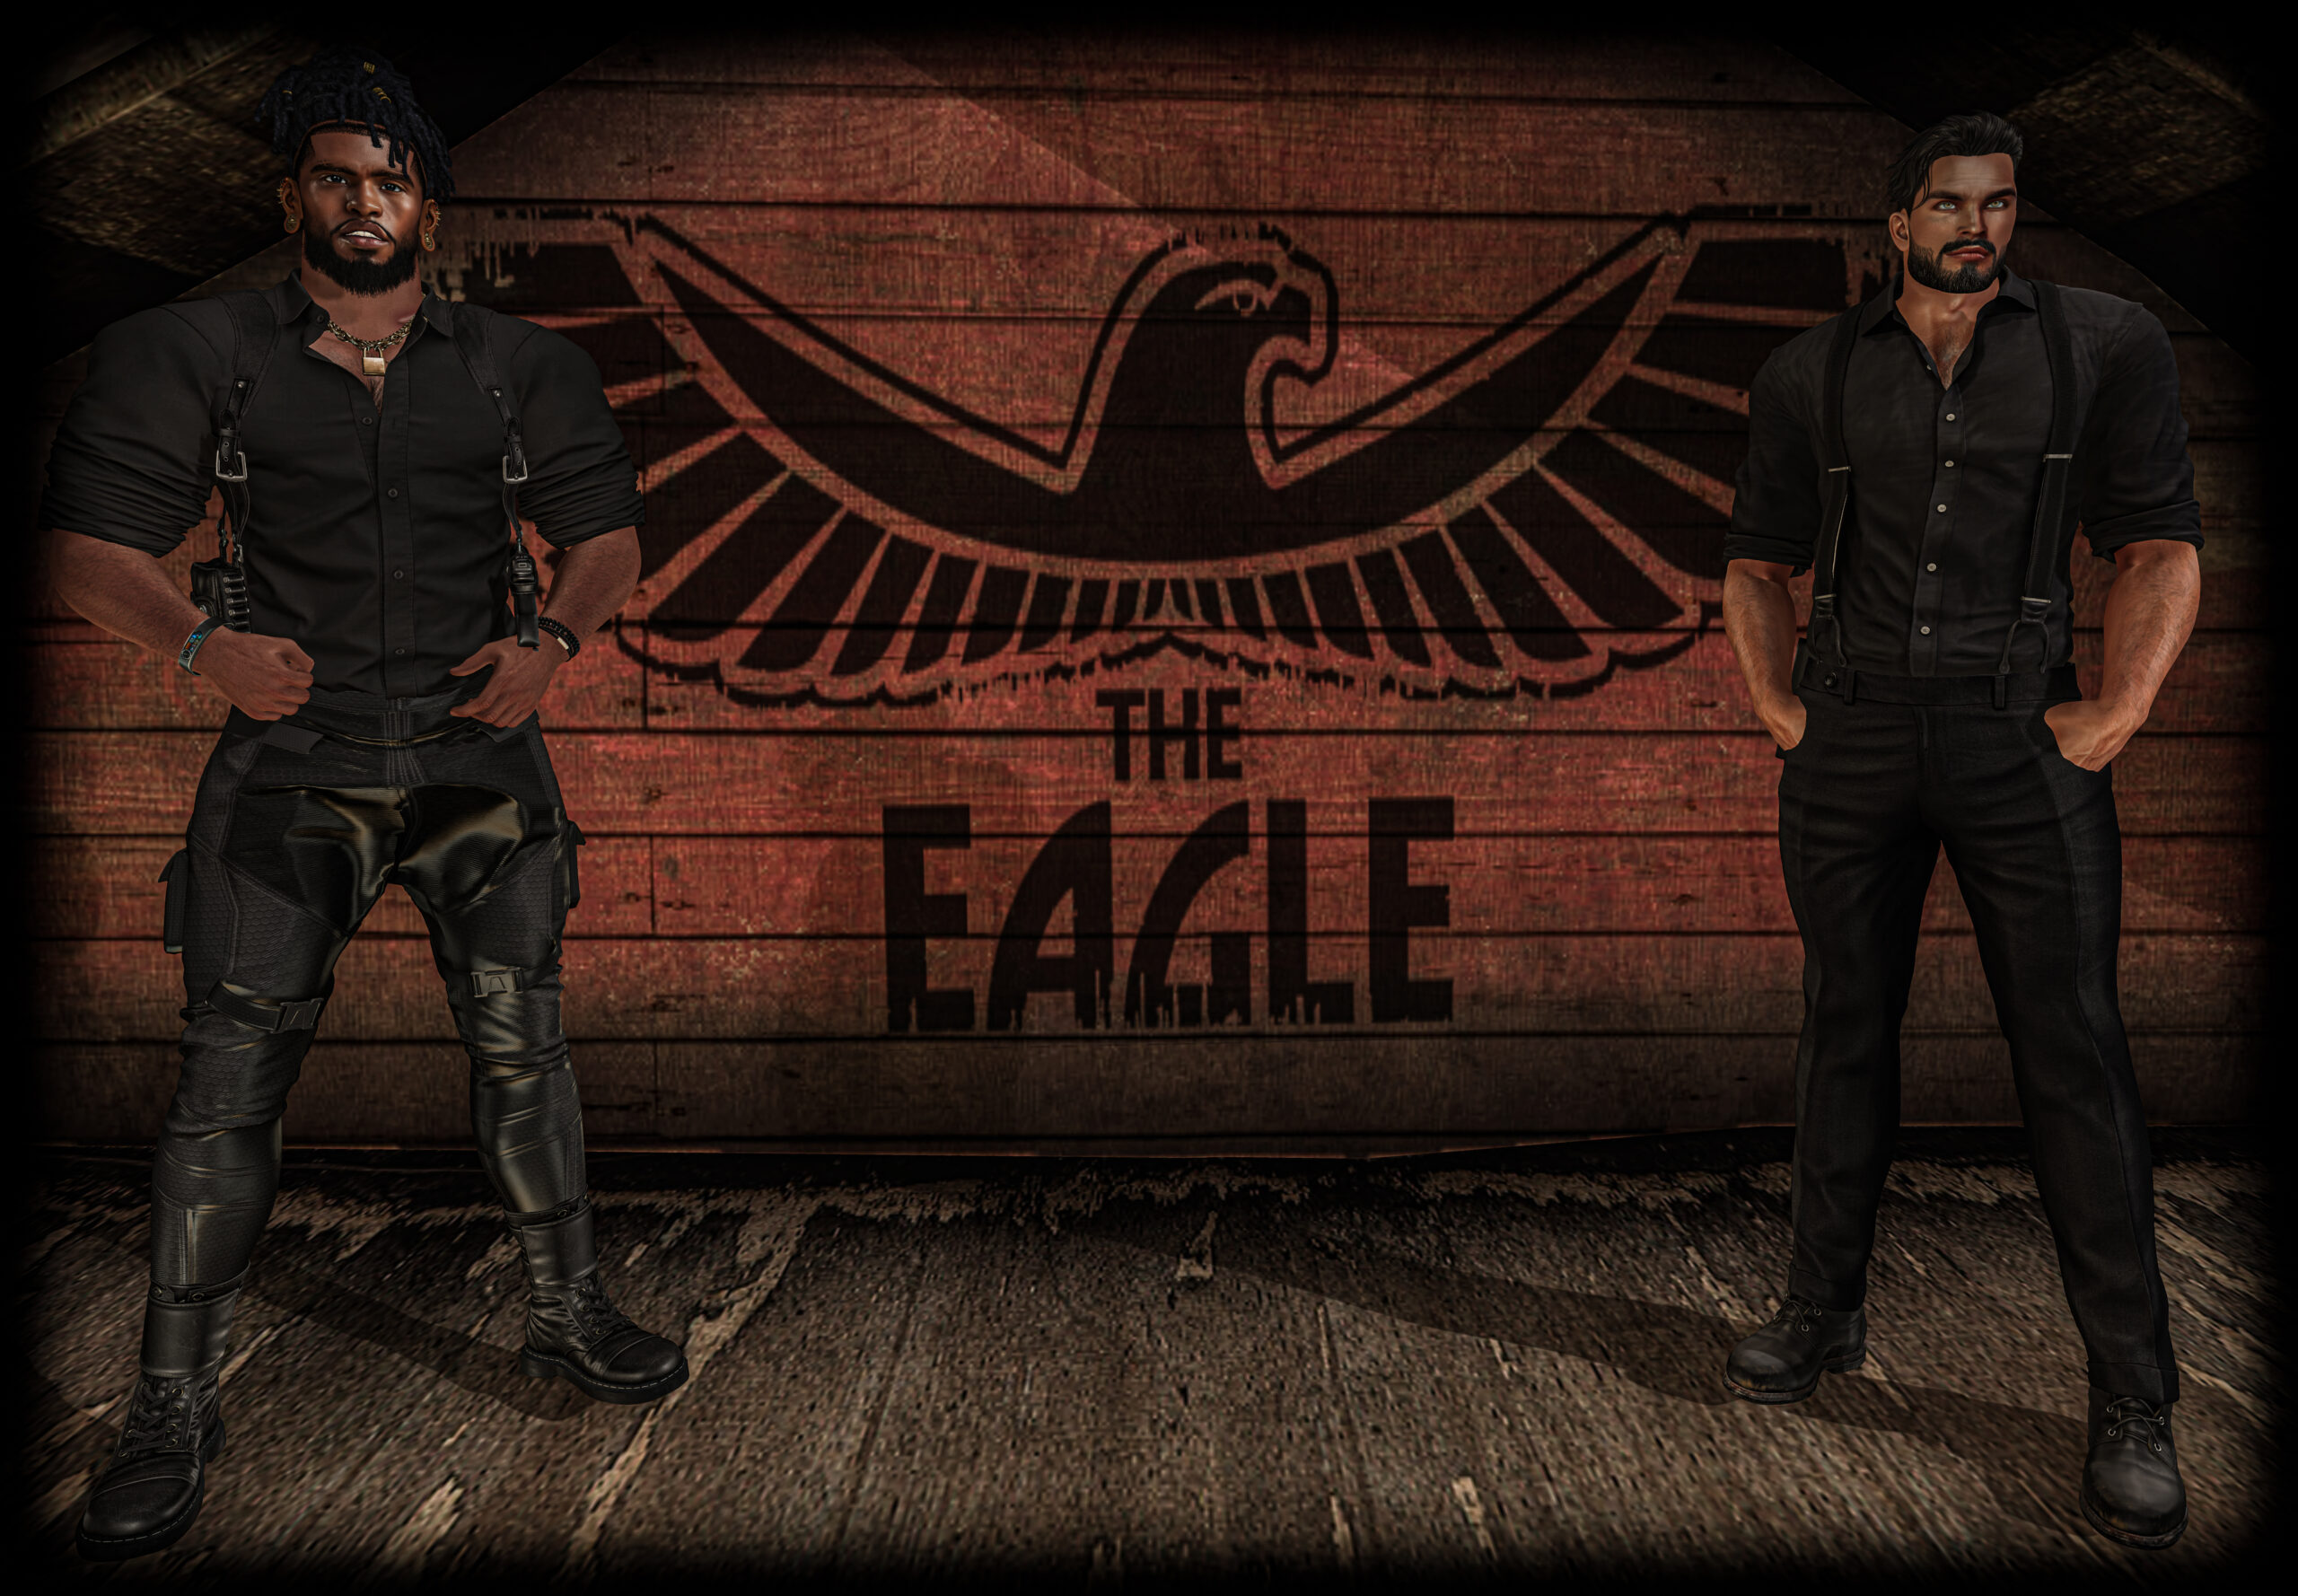 The Eagle owners outside with the main logo